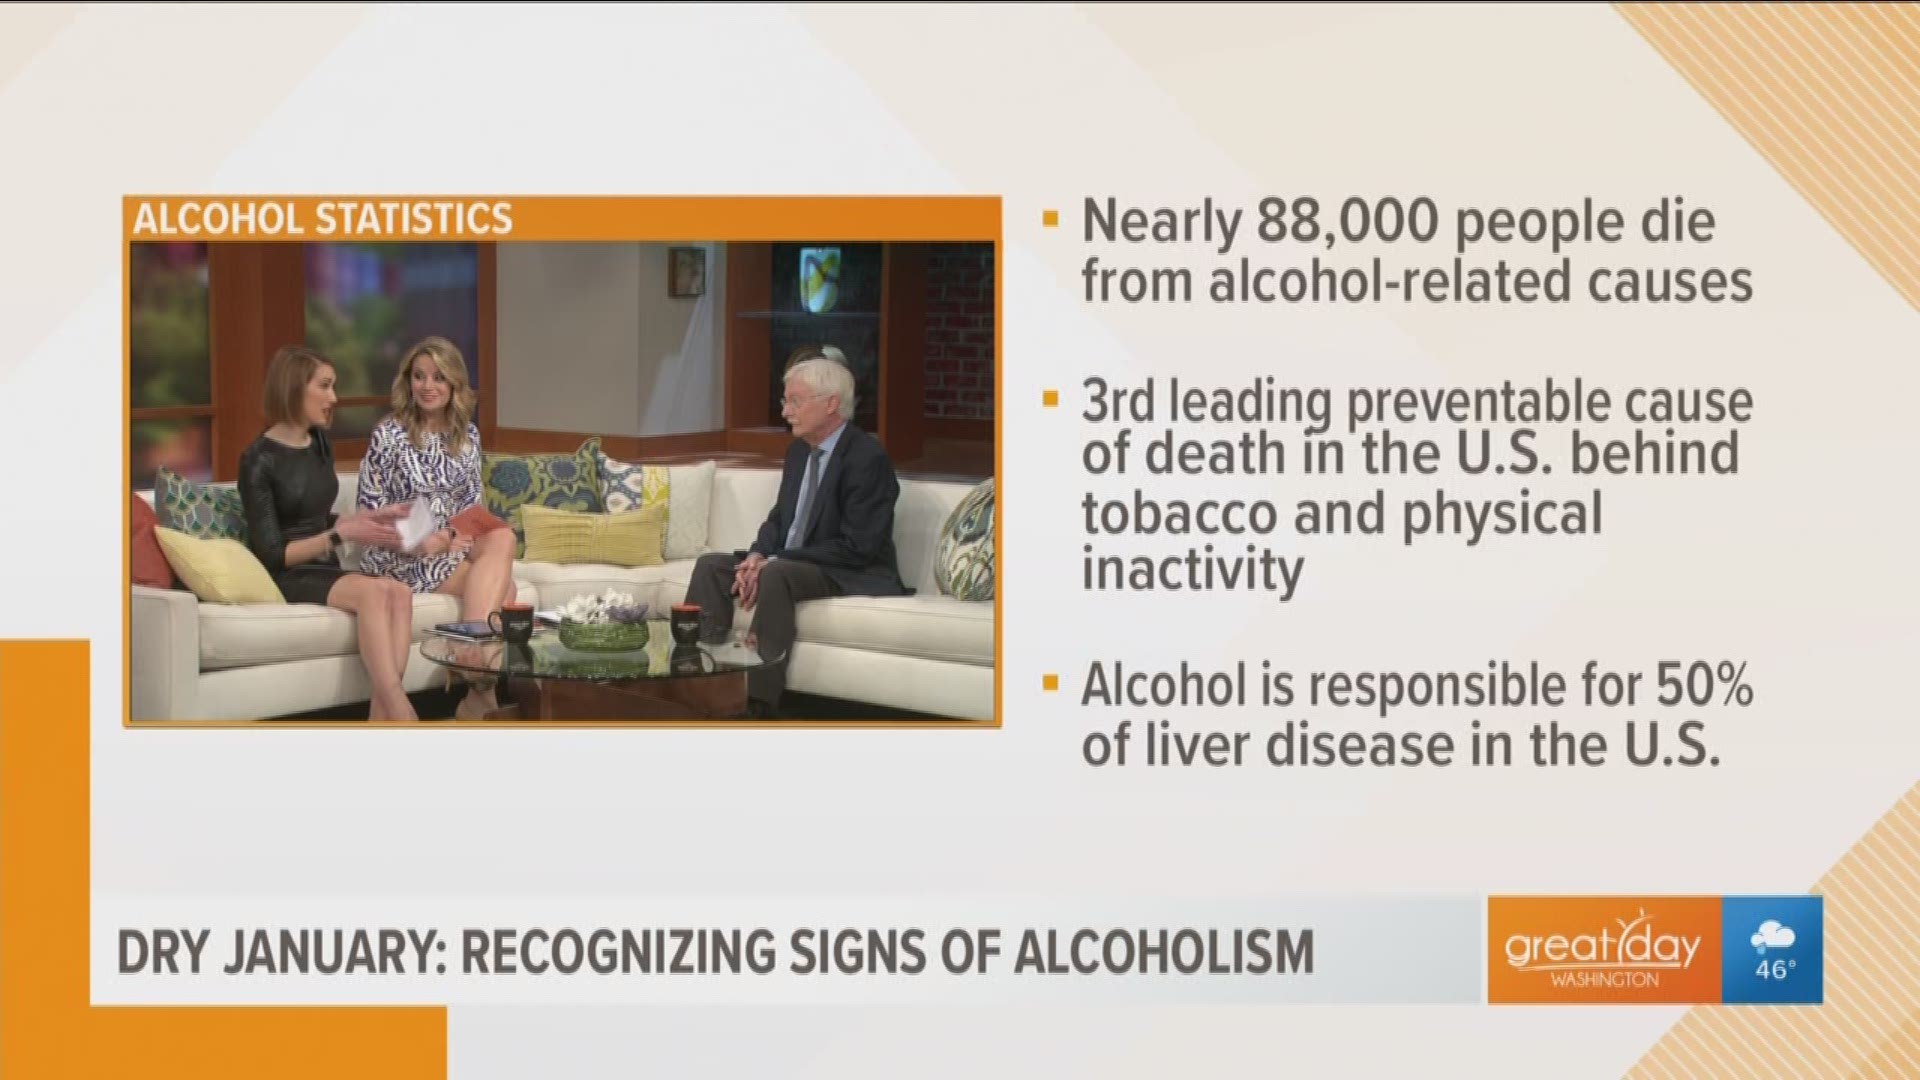 Dr. George Koob, Director of the National Institute of Alcohol Abuse and Alcoholism wants everyone to know how cutting back on alcohol can give tremendous benefits.